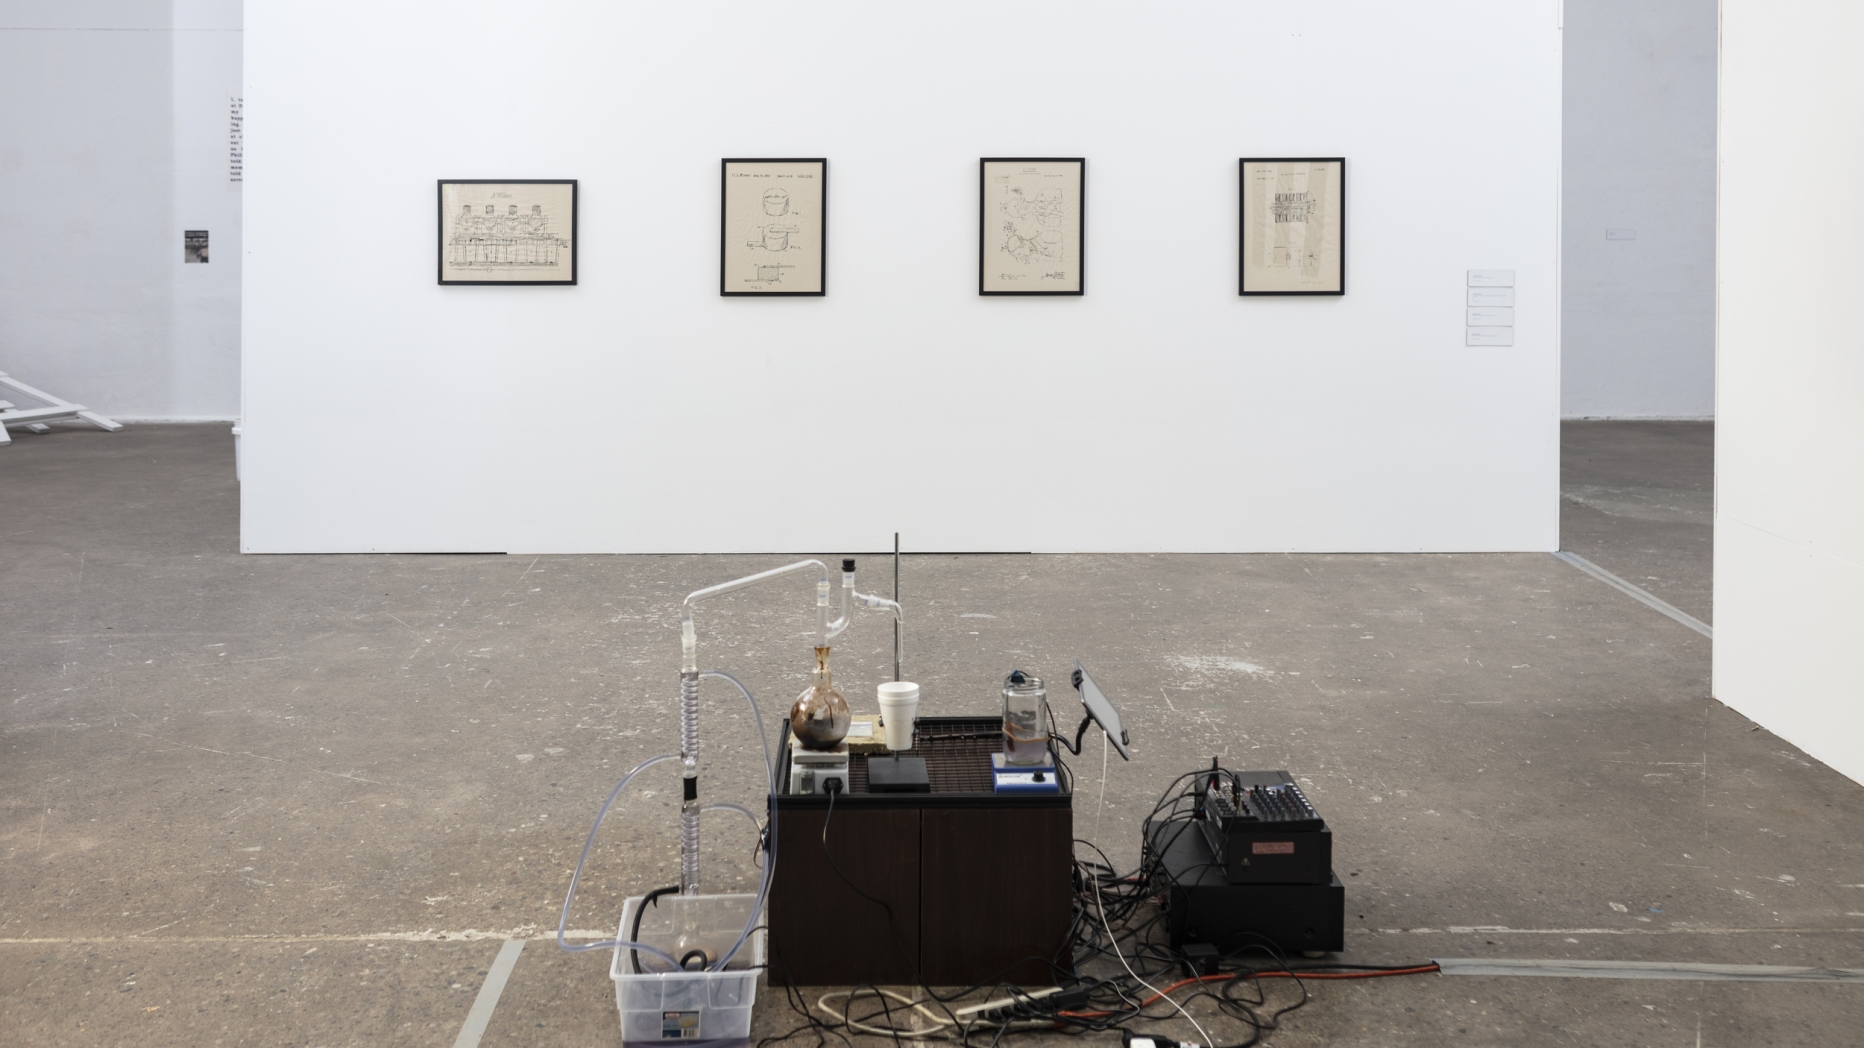 Gallery space with multimedia installation involving chemistry equipment, electronics and blueprints on wall in background